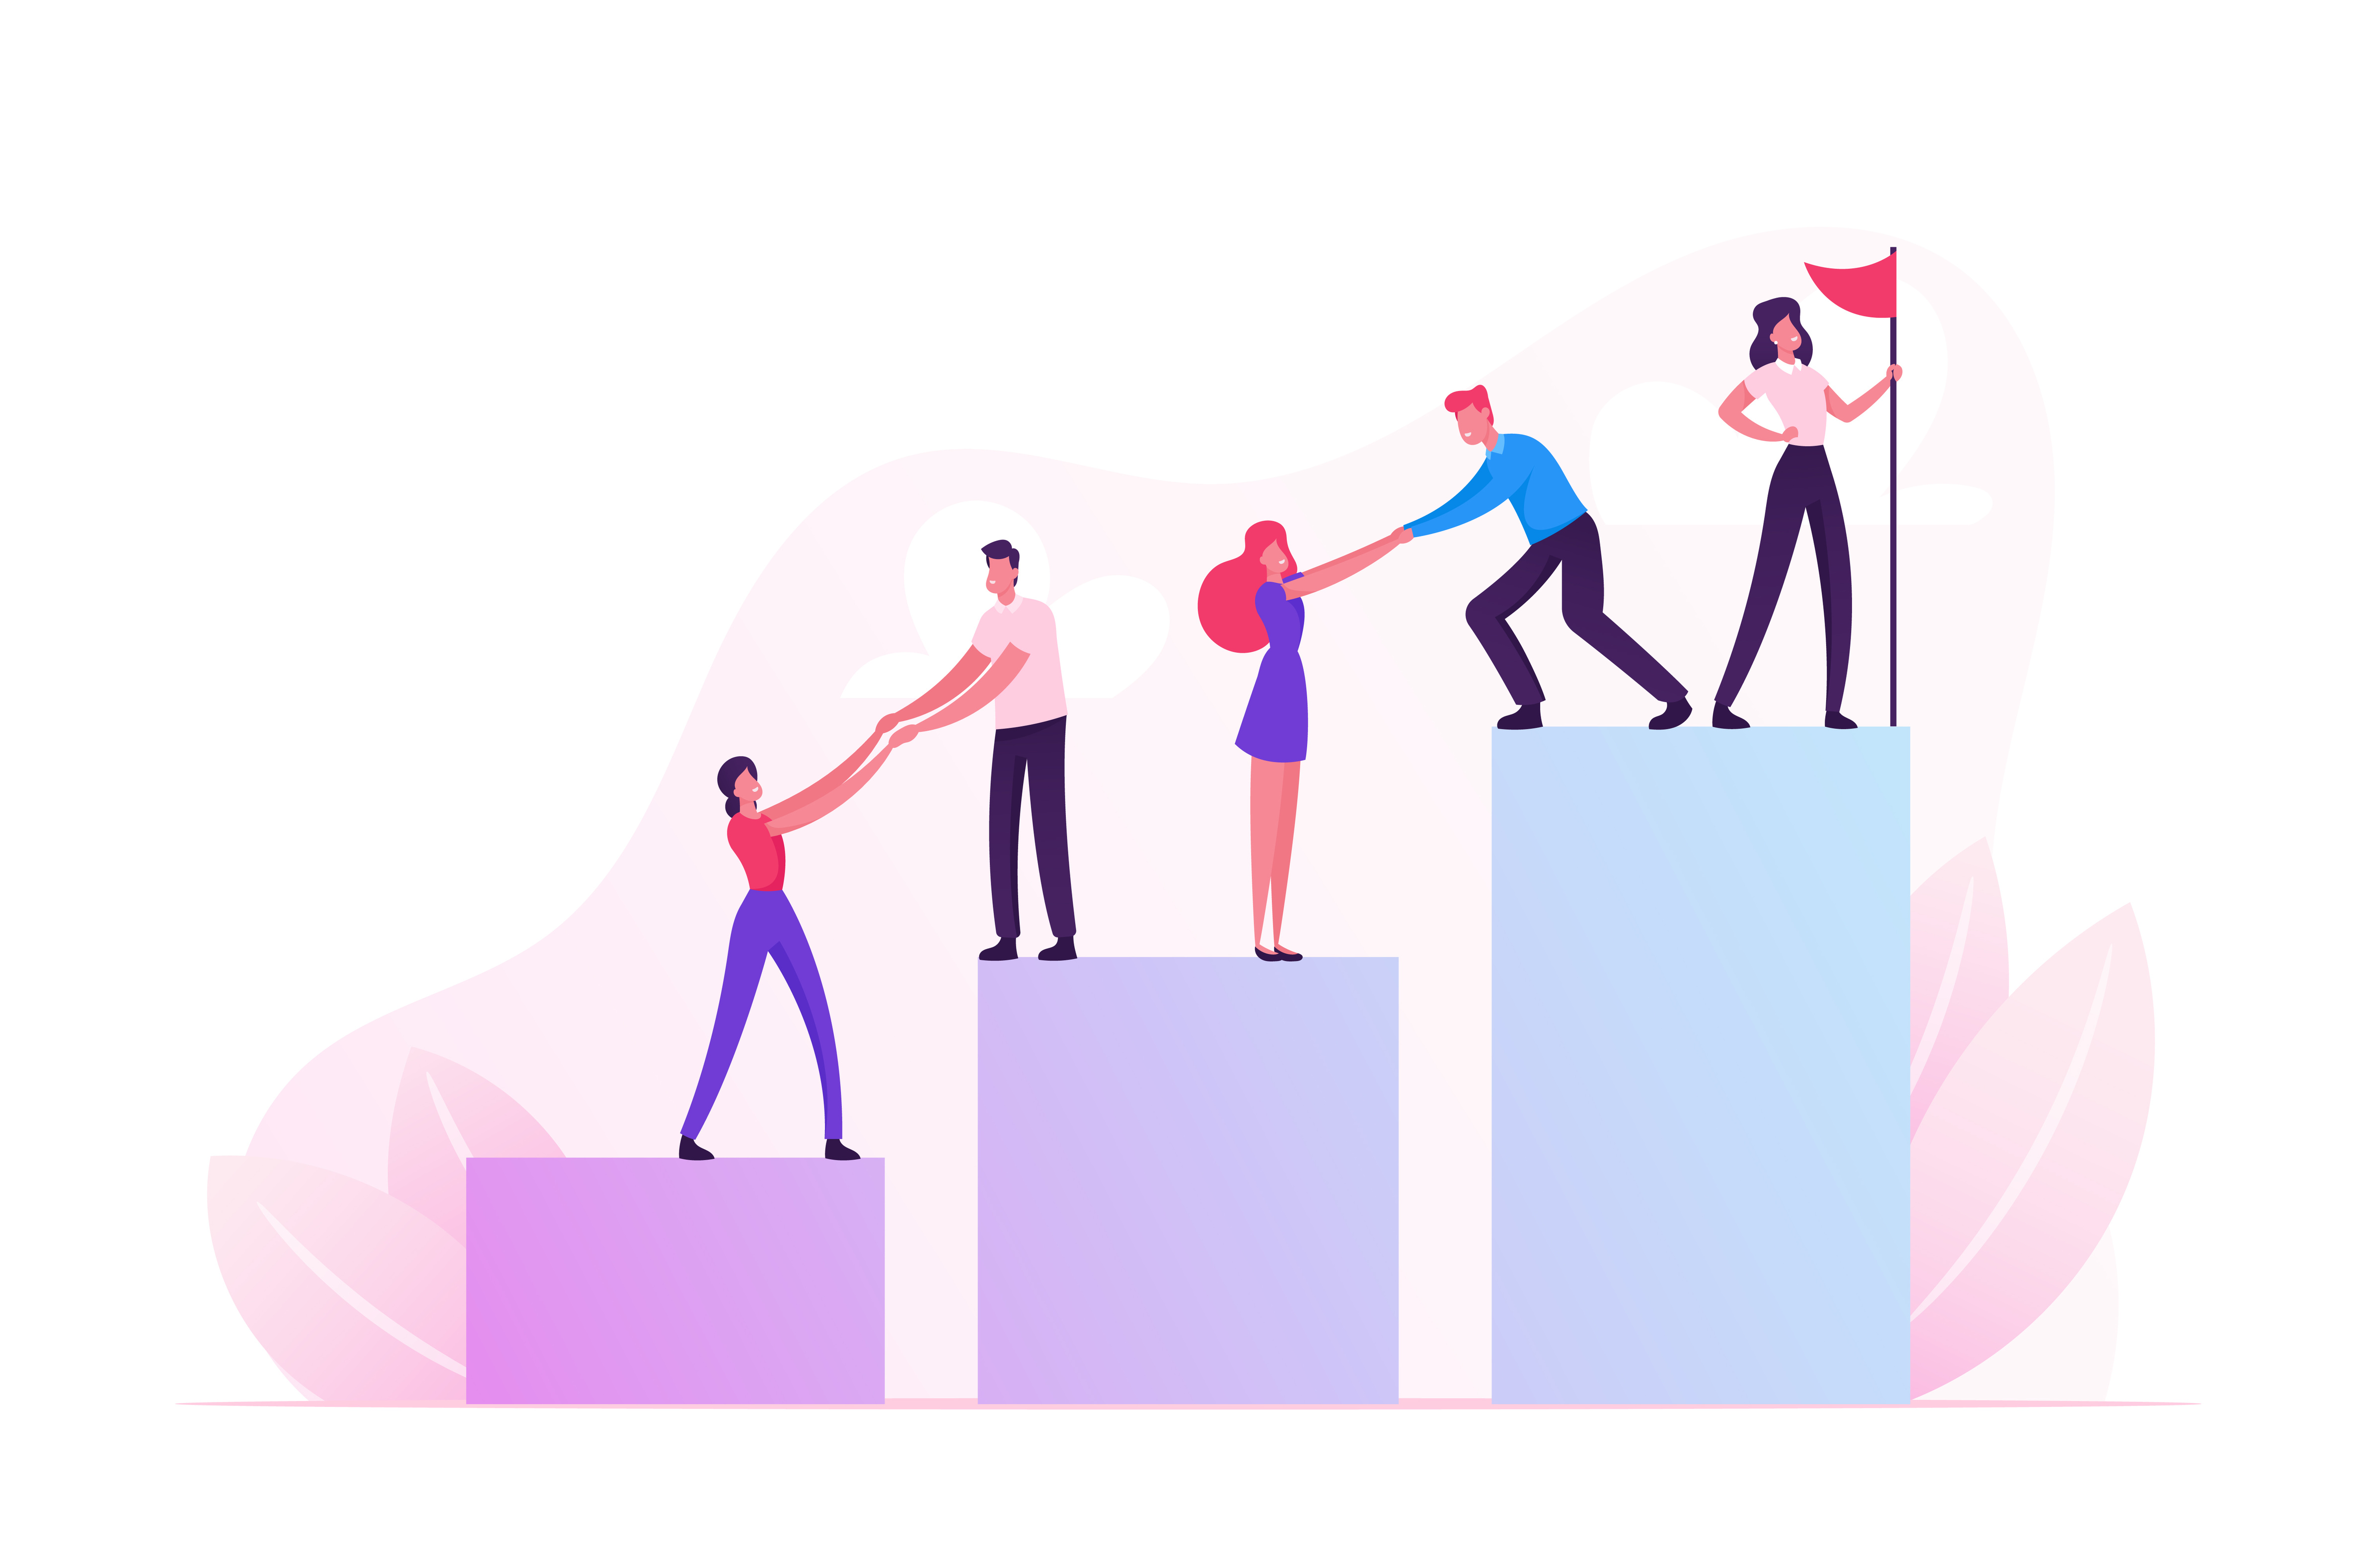 Business Team Climbing Up Column Chart with Leader Stand with Hoisted Red Flag on Top. Businessmen Pull Teammates Businesswomen to Peak Teamwork and Leadership Concept Cartoon Flat Vector Illustration